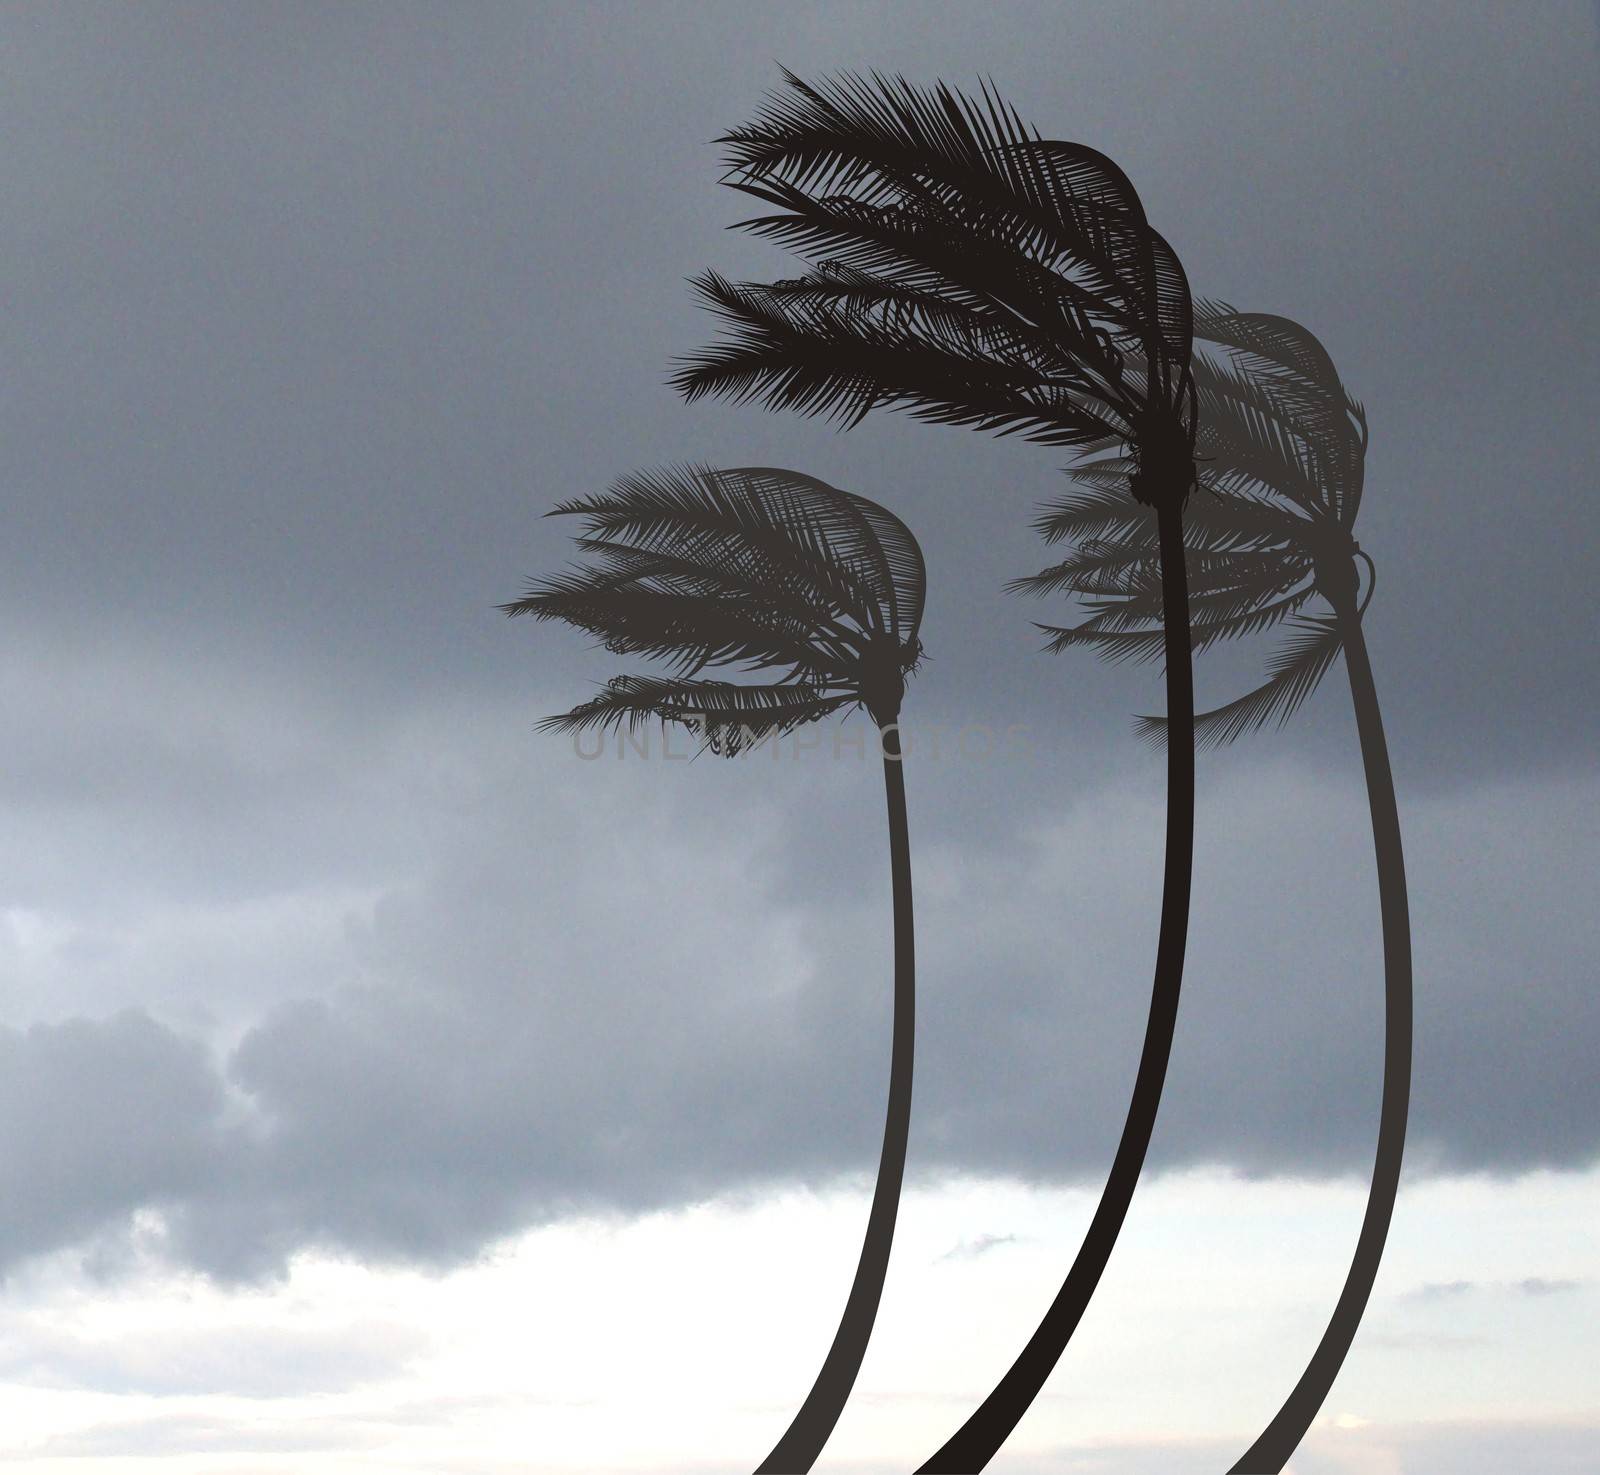 Palms in the Storm by ard1